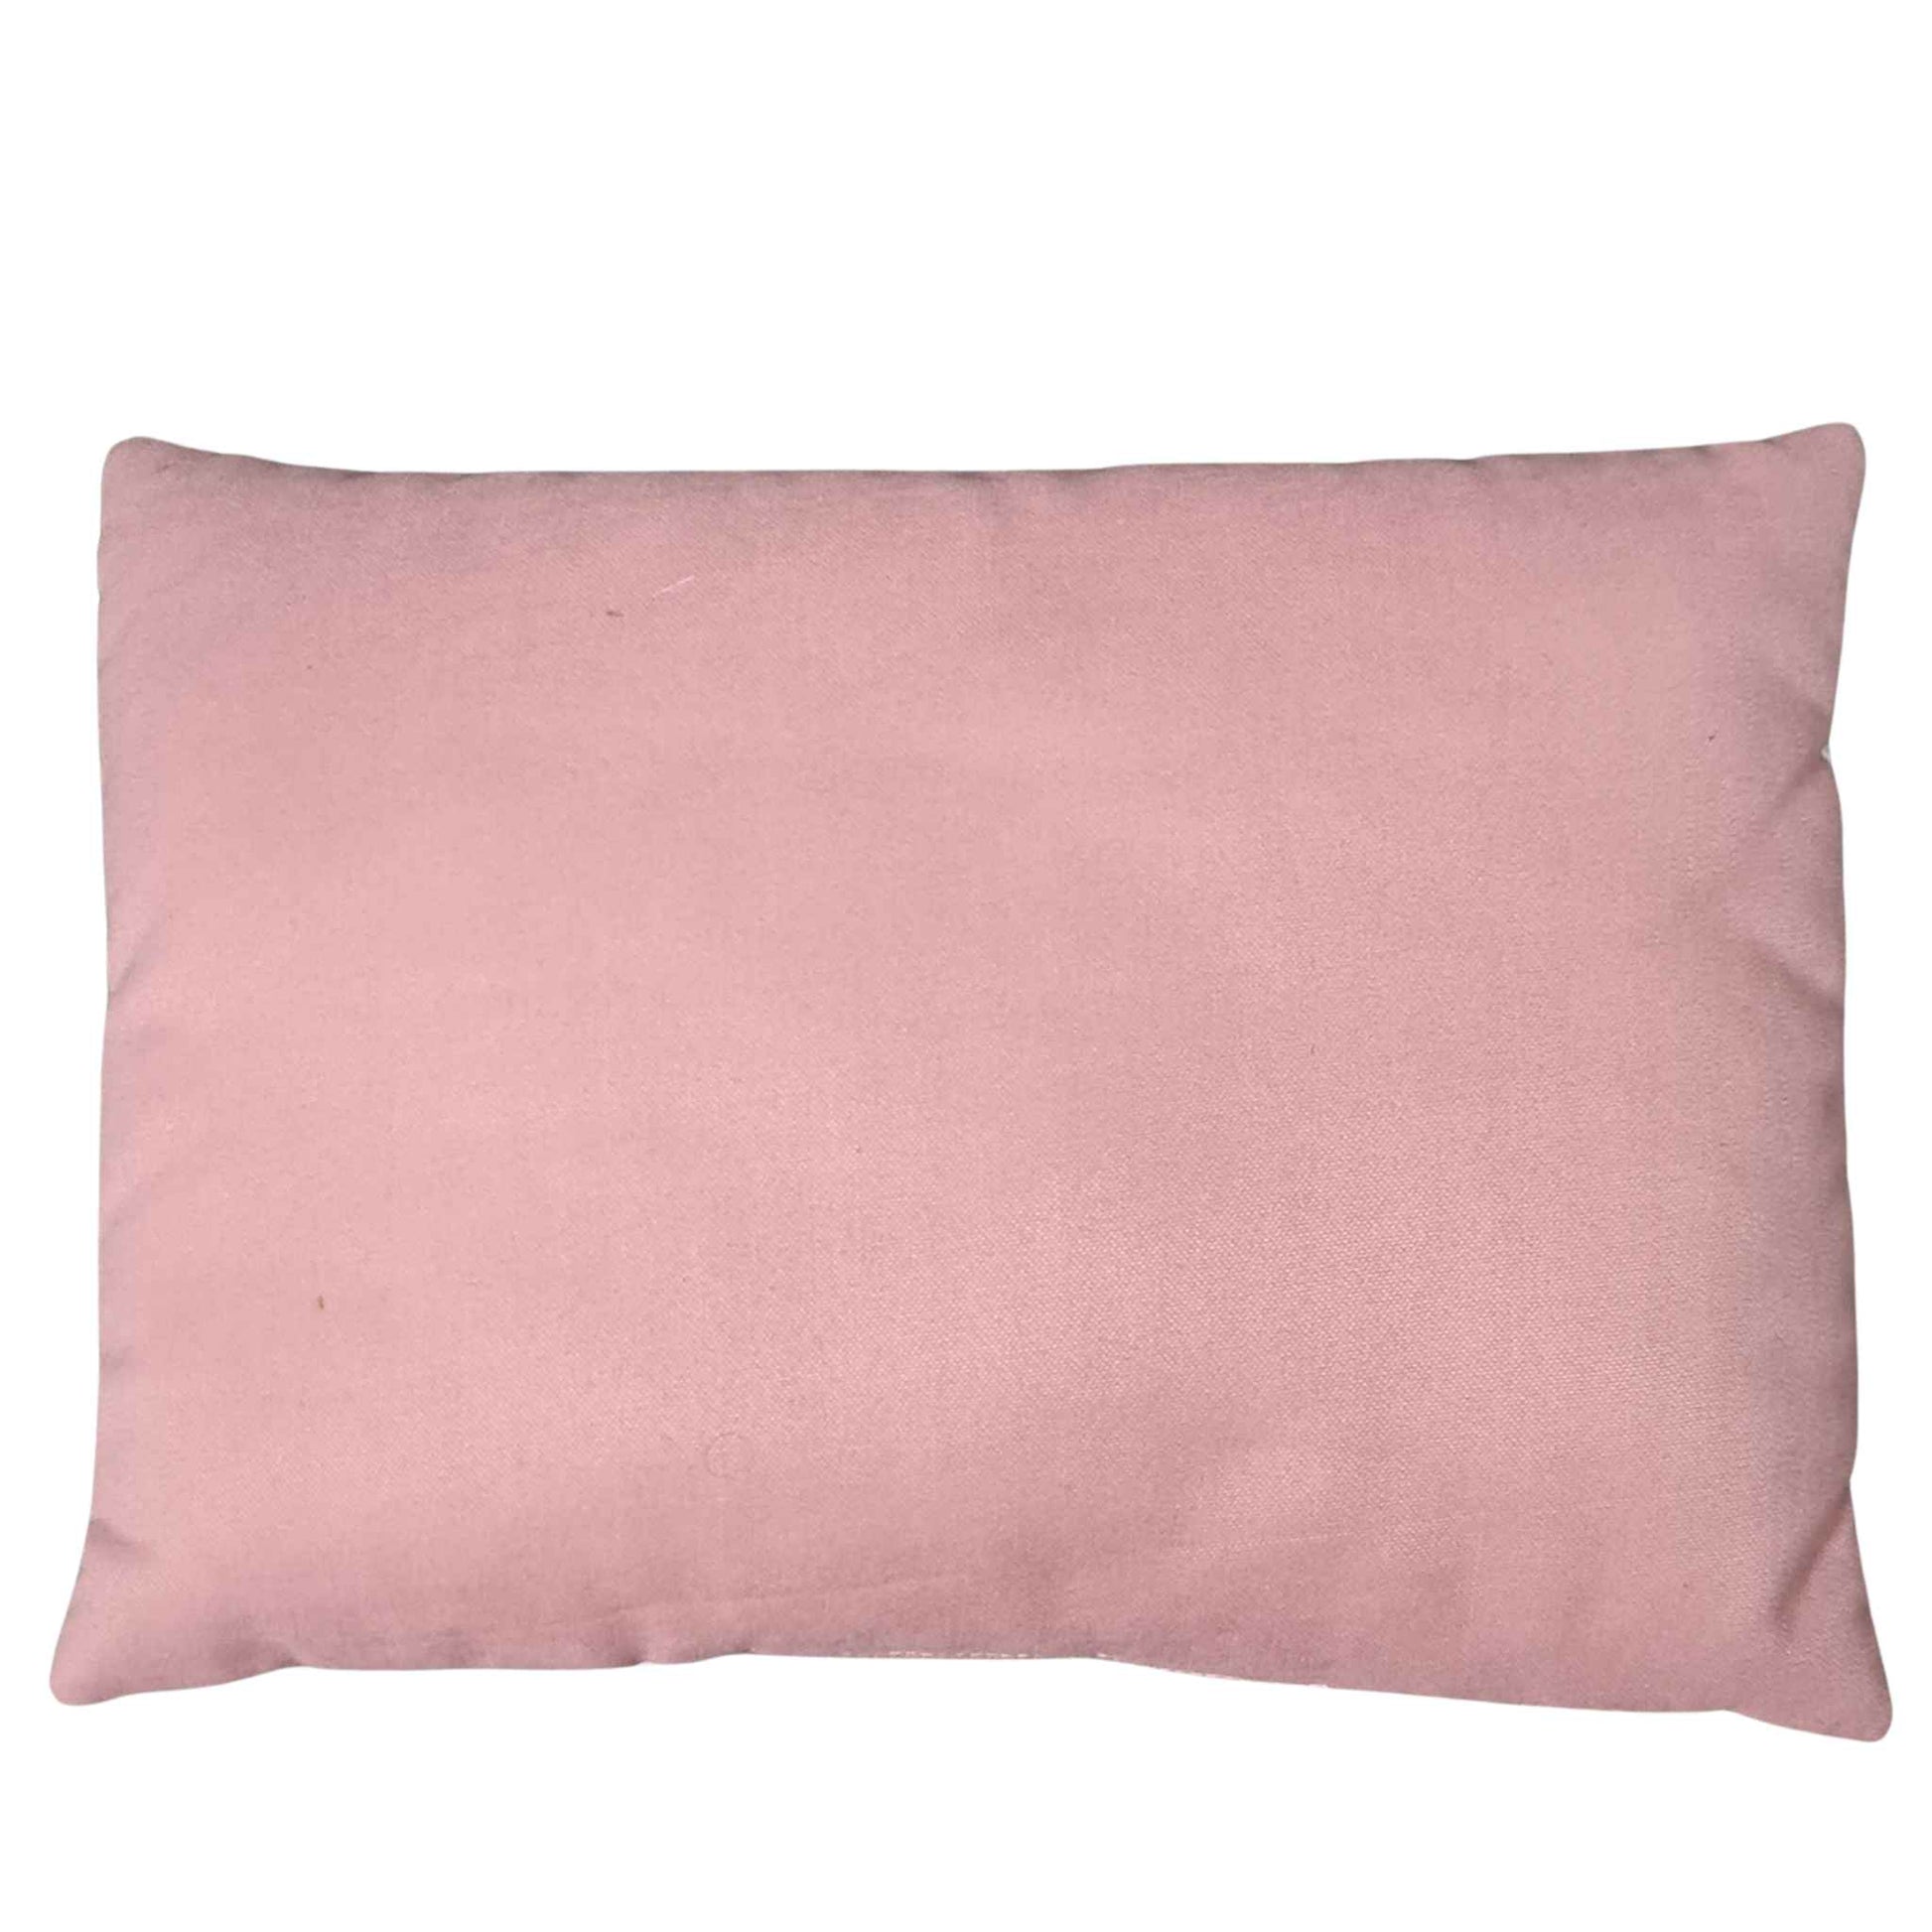 pink pillow for baby crib 